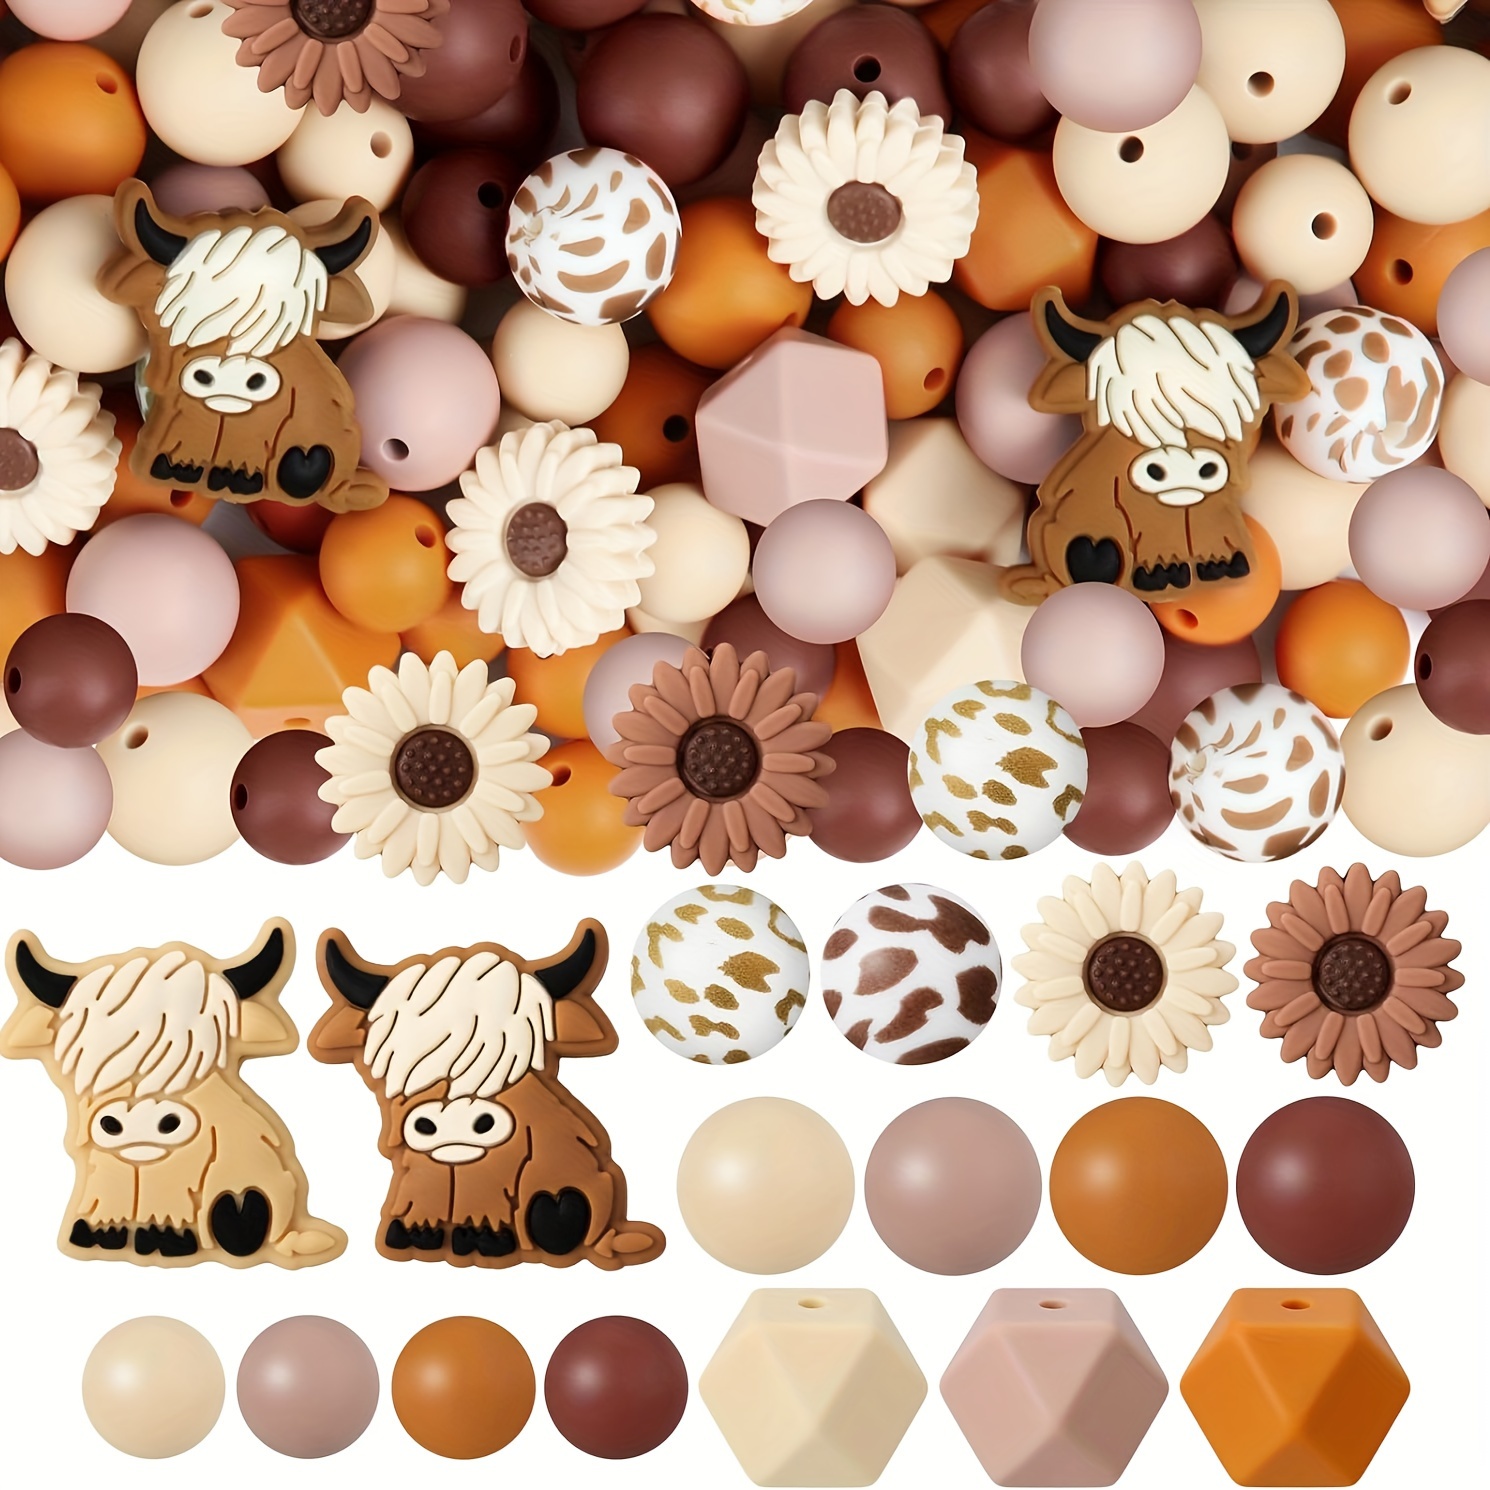 

60pcs Brown Silicone Cow & - Hexagon Craft Beads For Diy Jewelry, Necklaces, Bracelets, Keychains